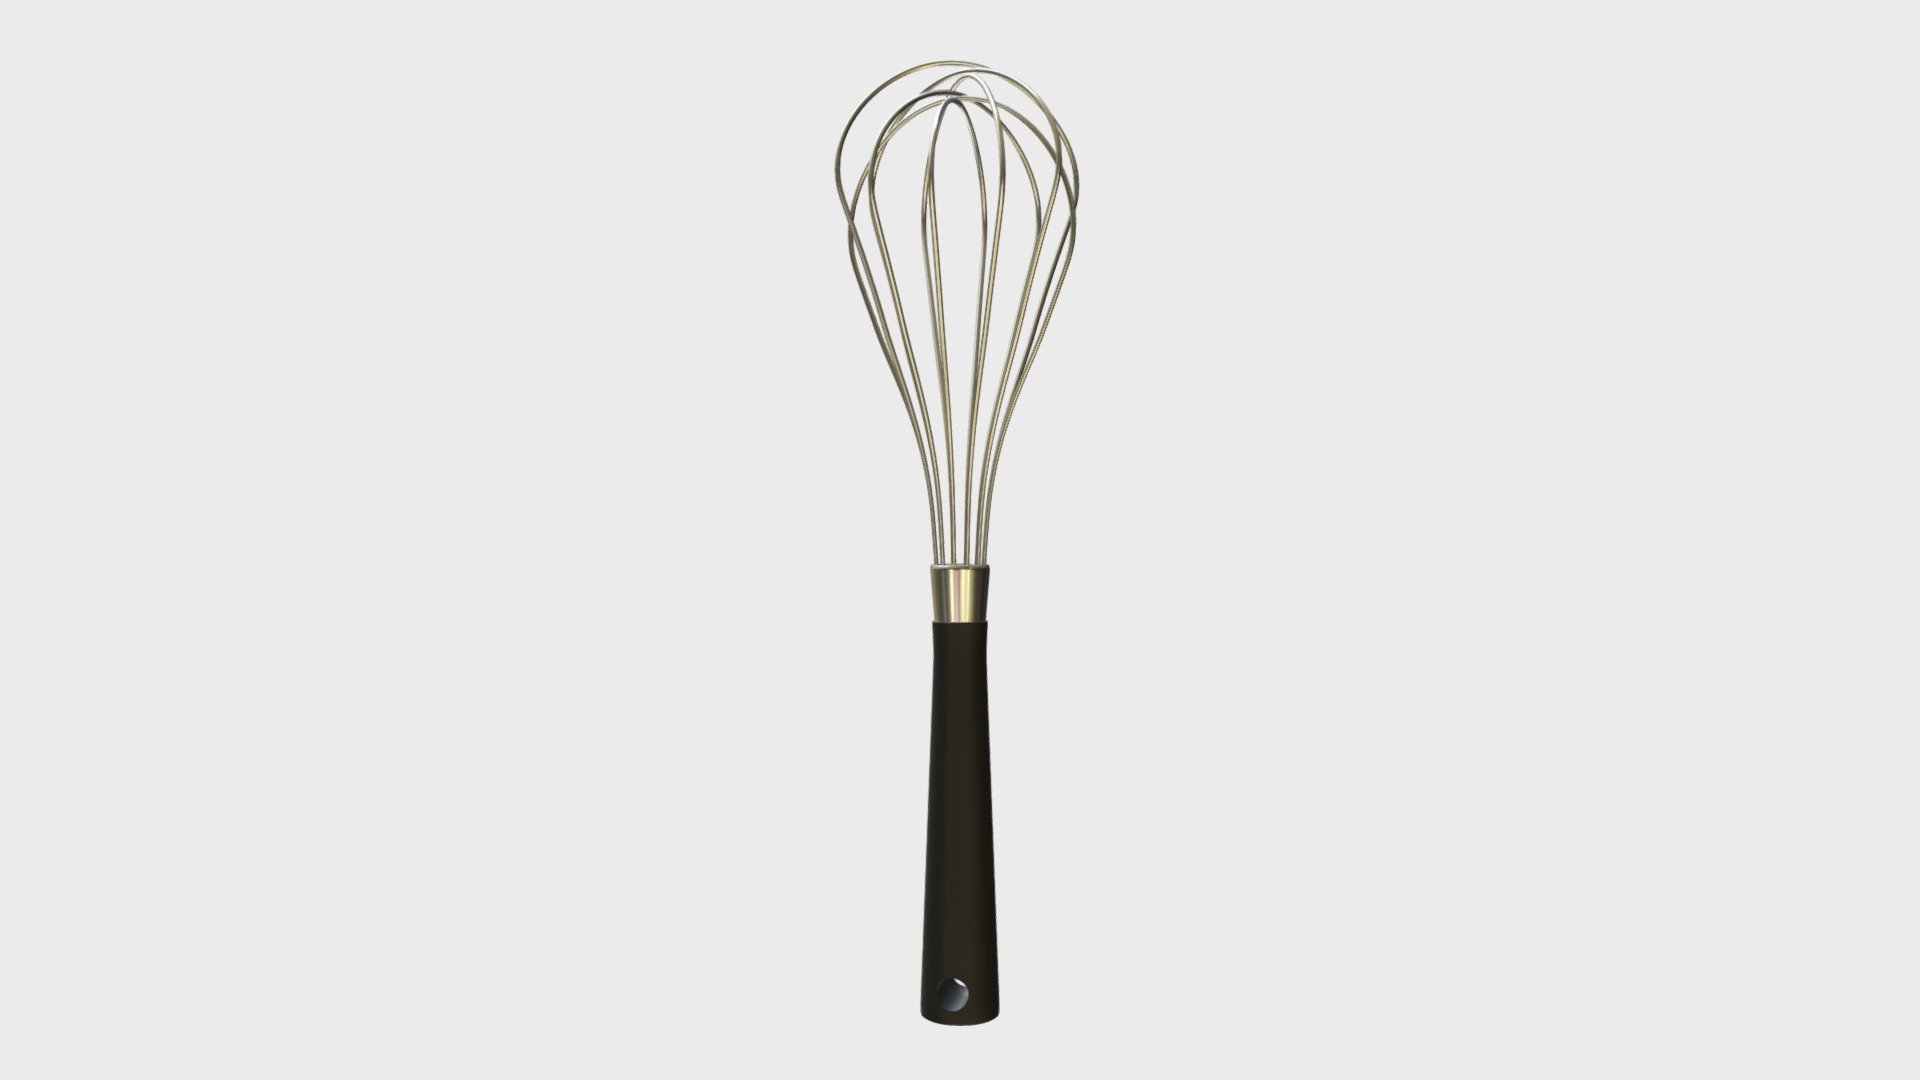 Kitchen whisk with a black handle